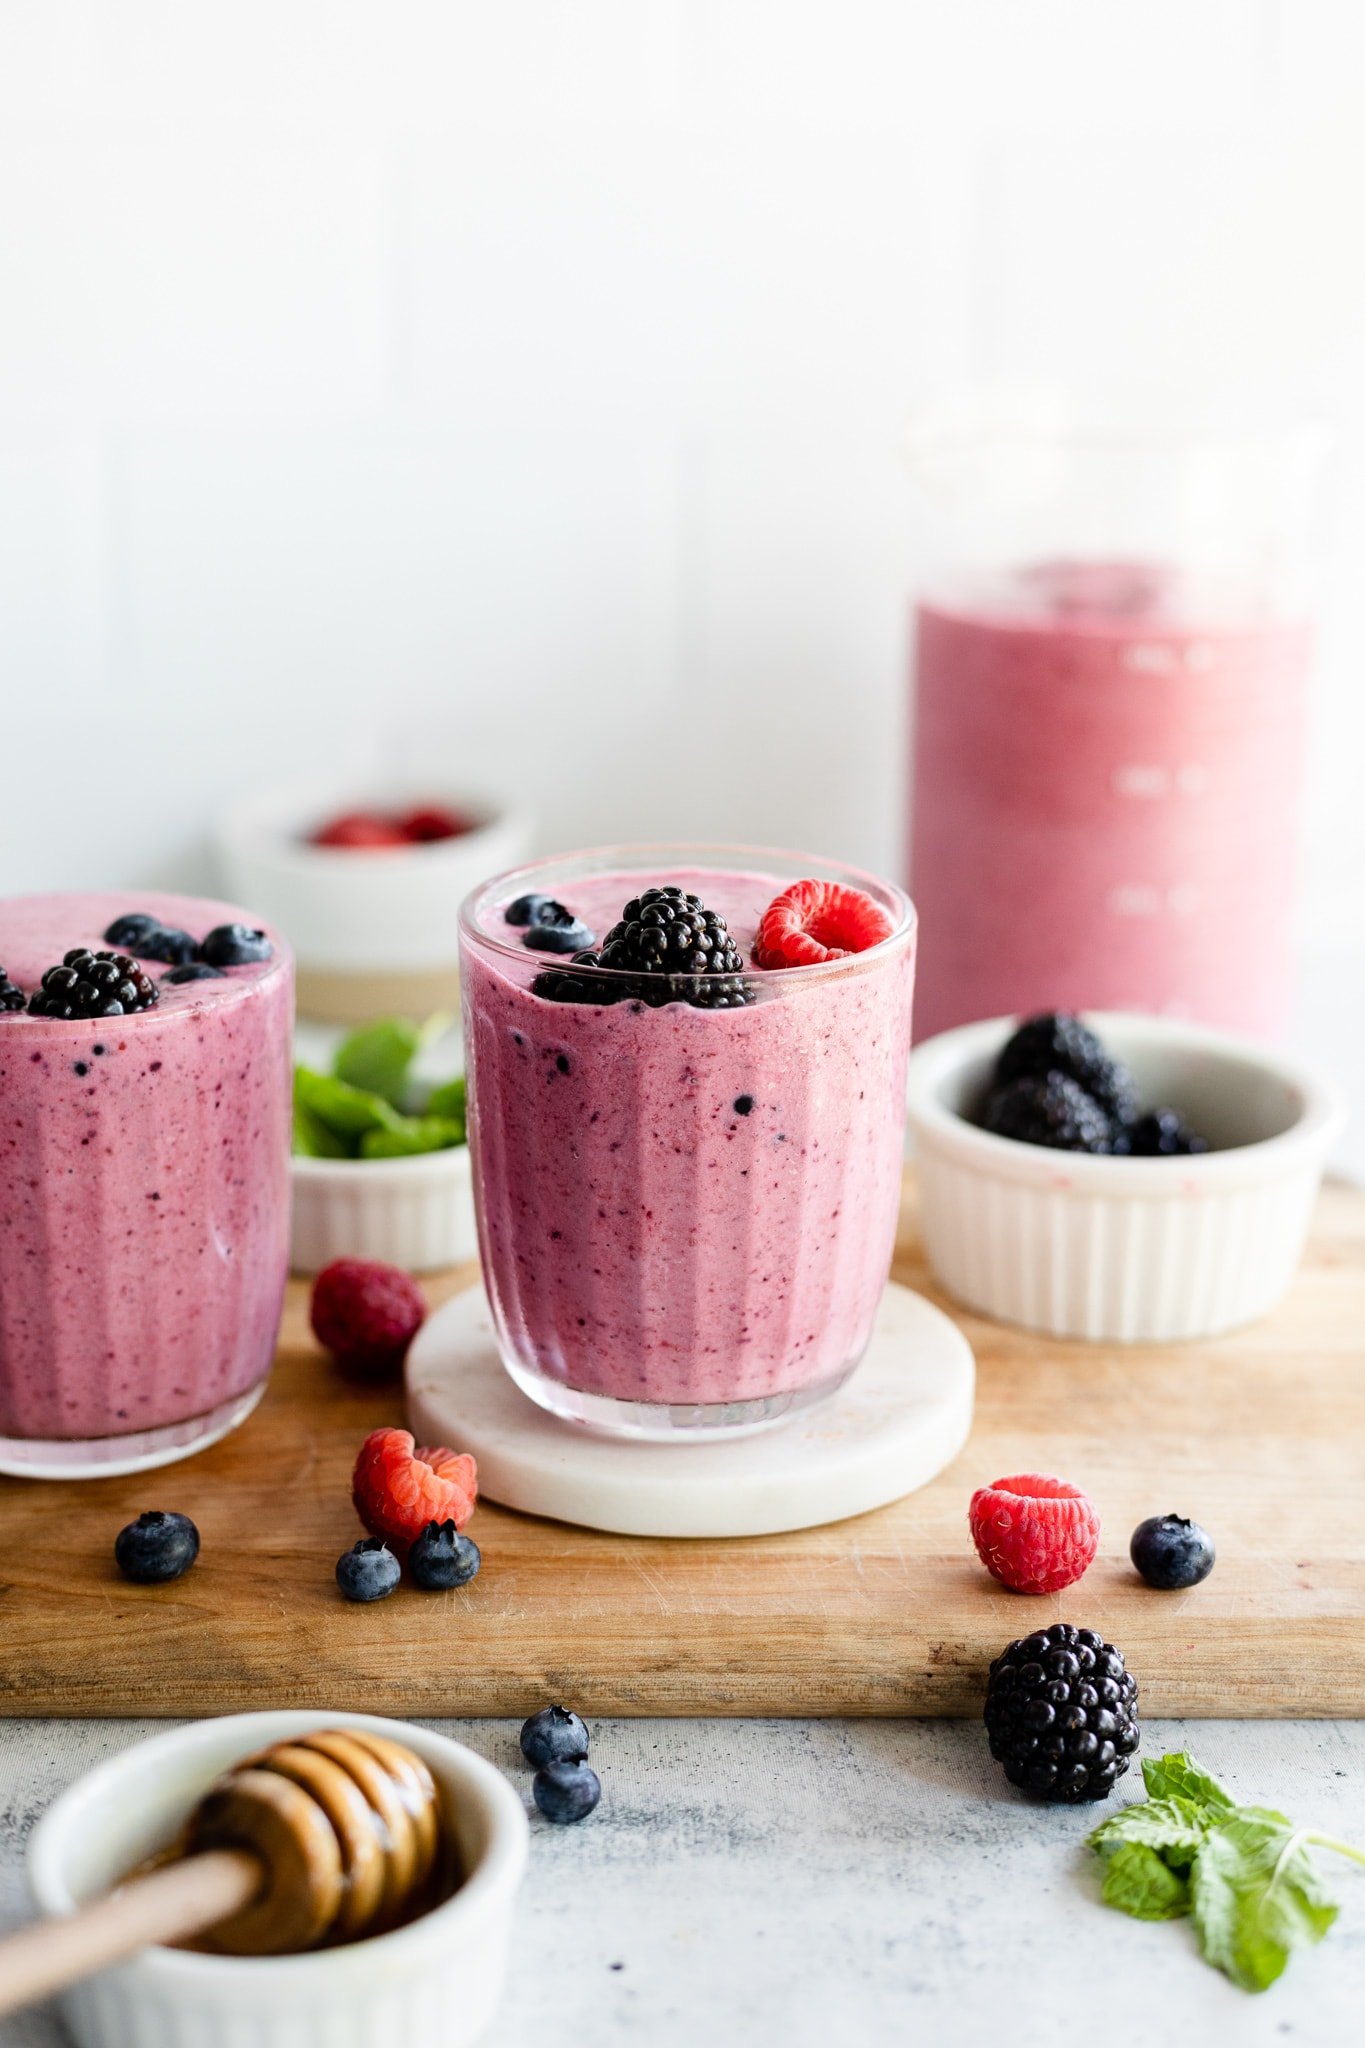 https://allthehealthythings.com/wp-content/uploads/2021/06/triple-berry-smoothie-4-1.jpg